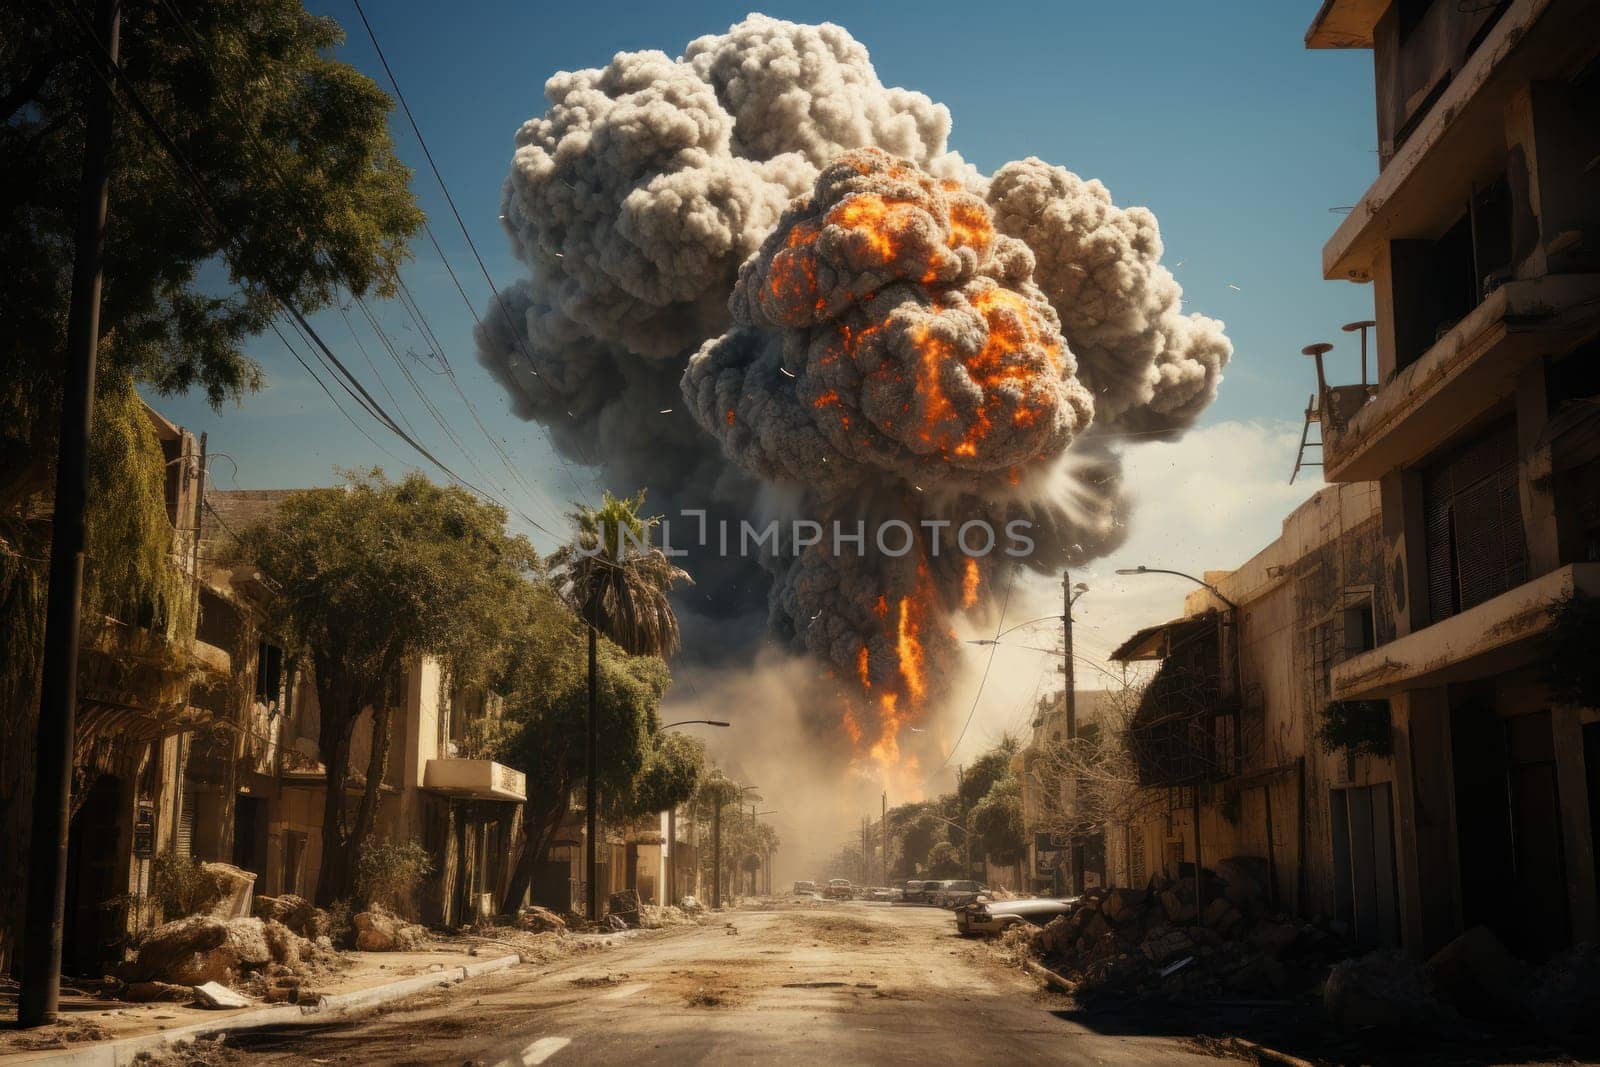 photorealistic image of a bomb explosion in a realistic war zone by nijieimu